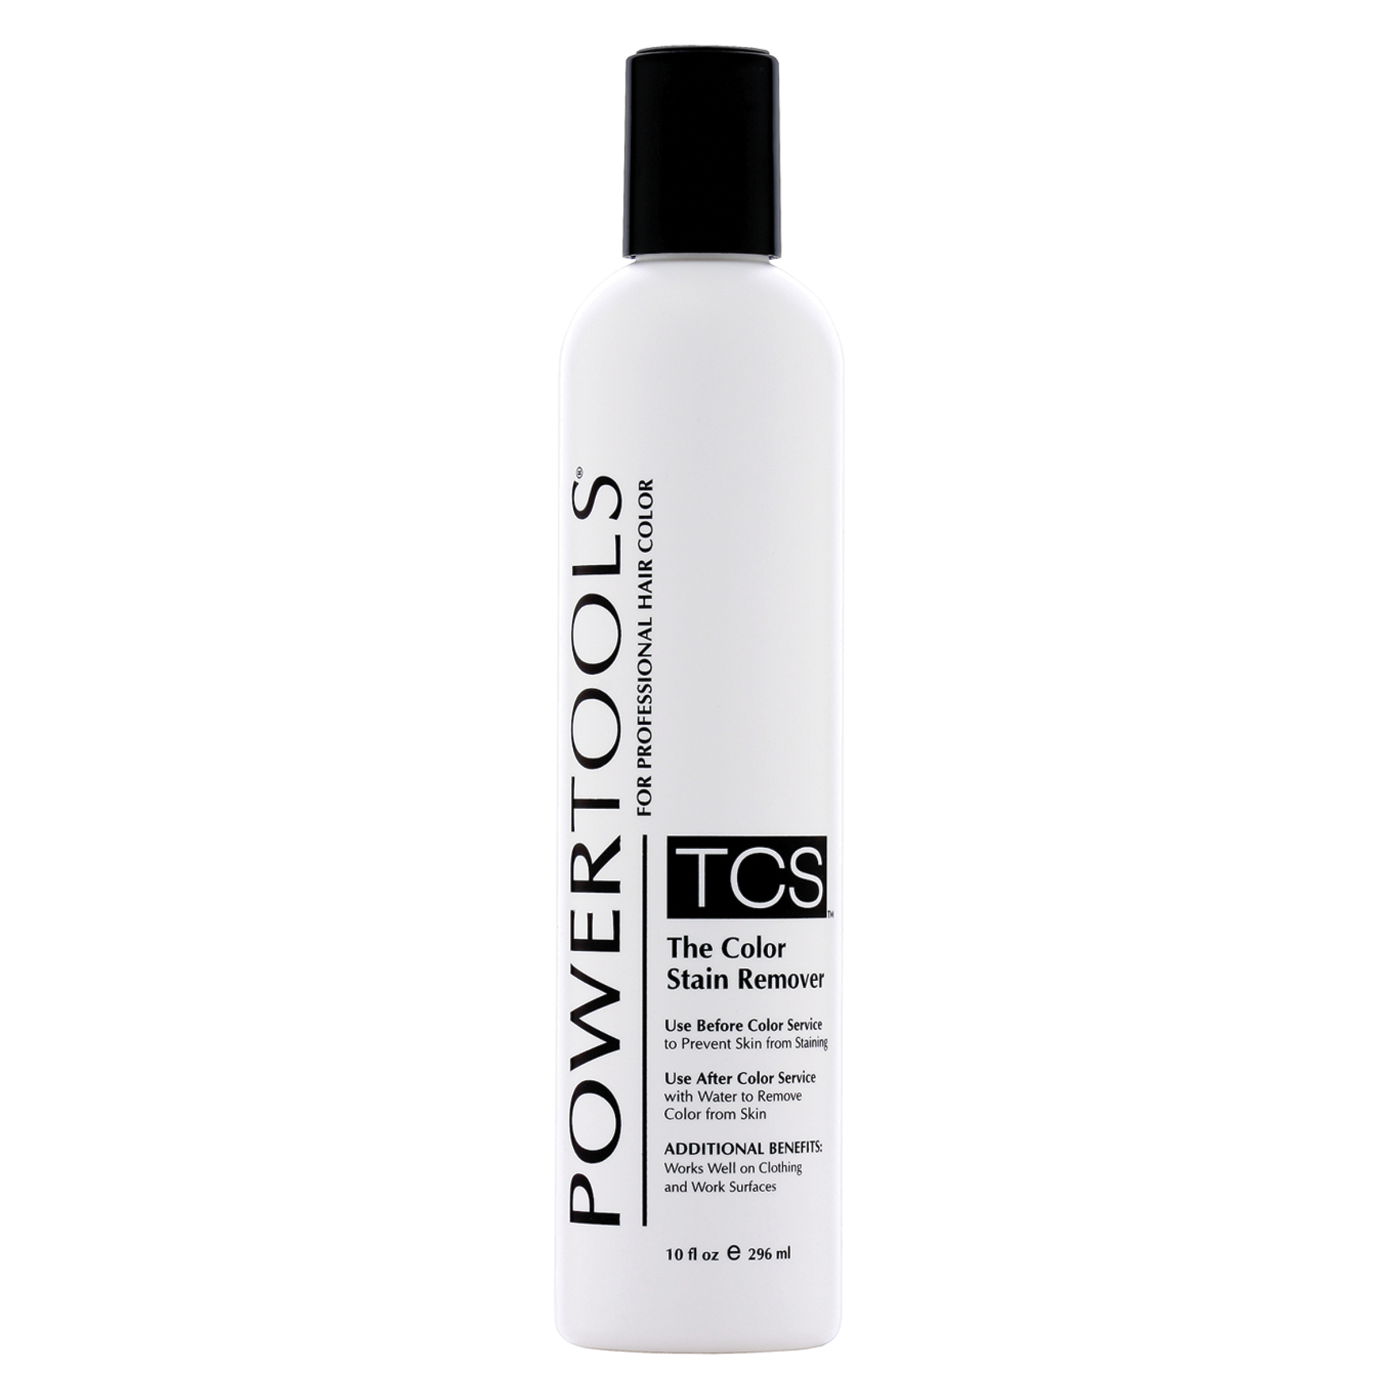 TCS, The Color Stain Remover and Barrier